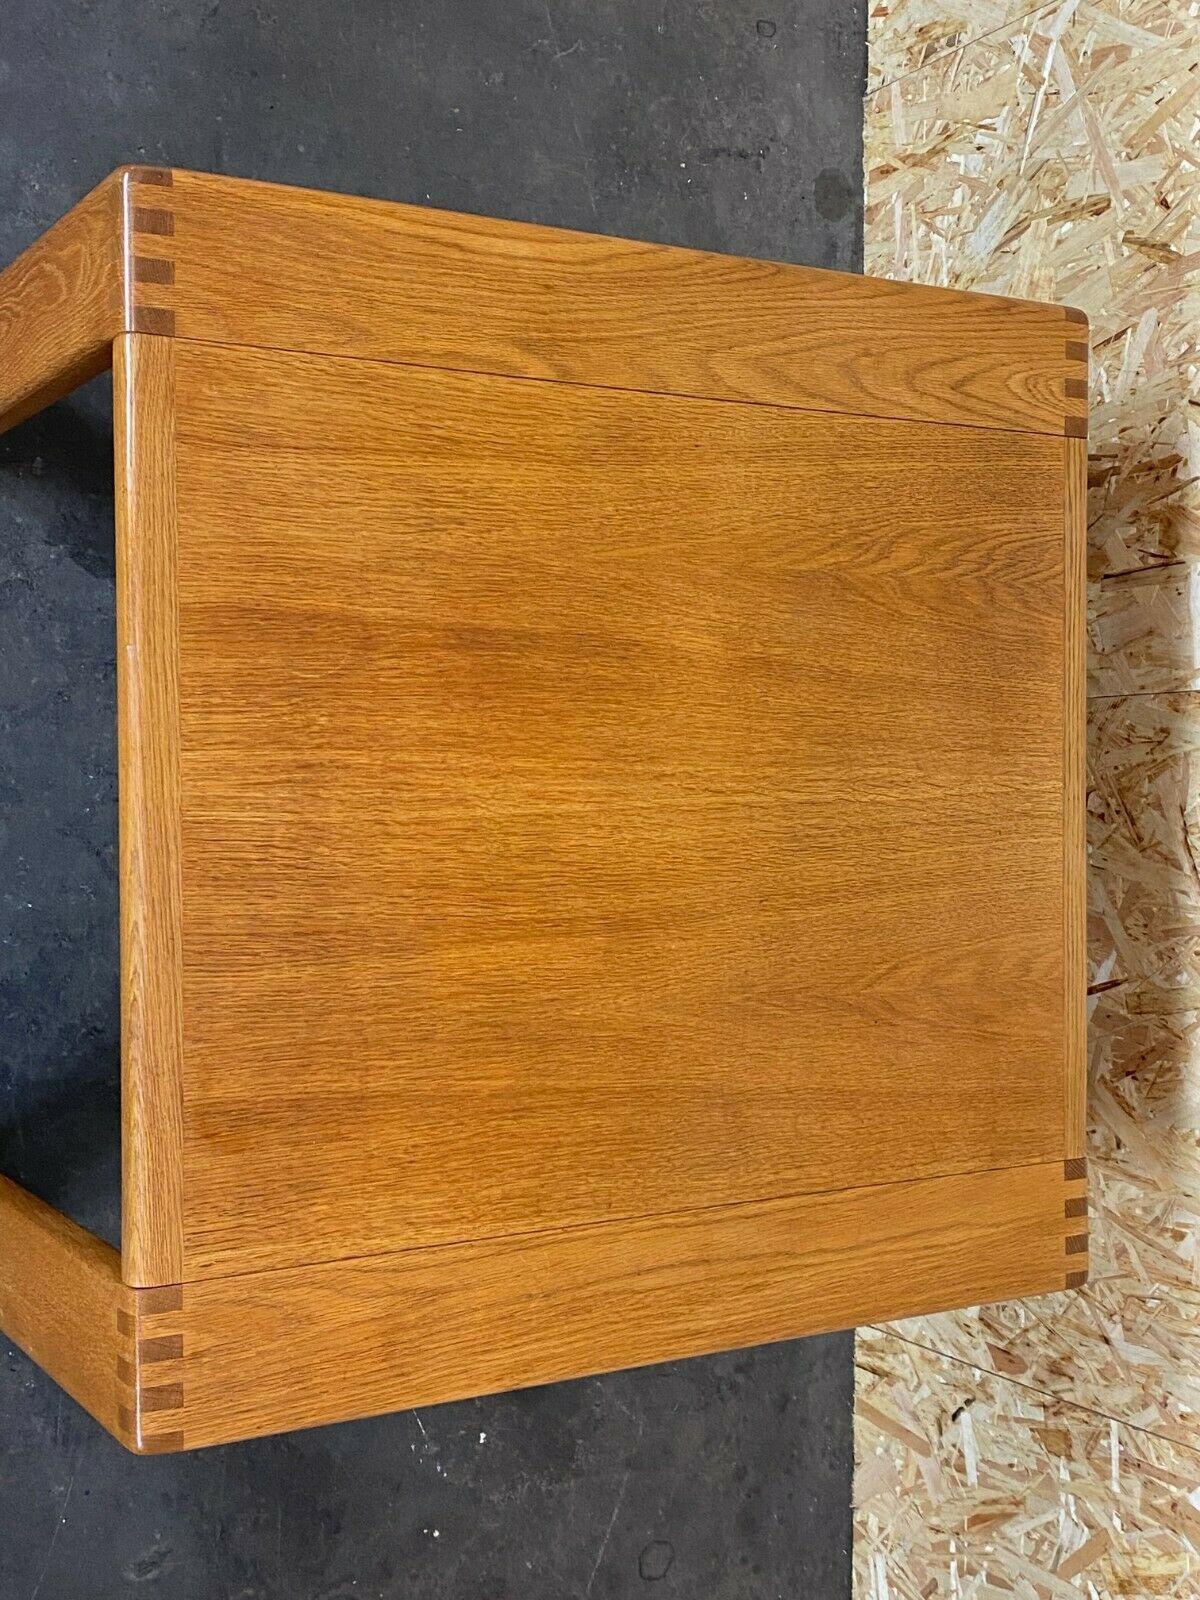 70s side table